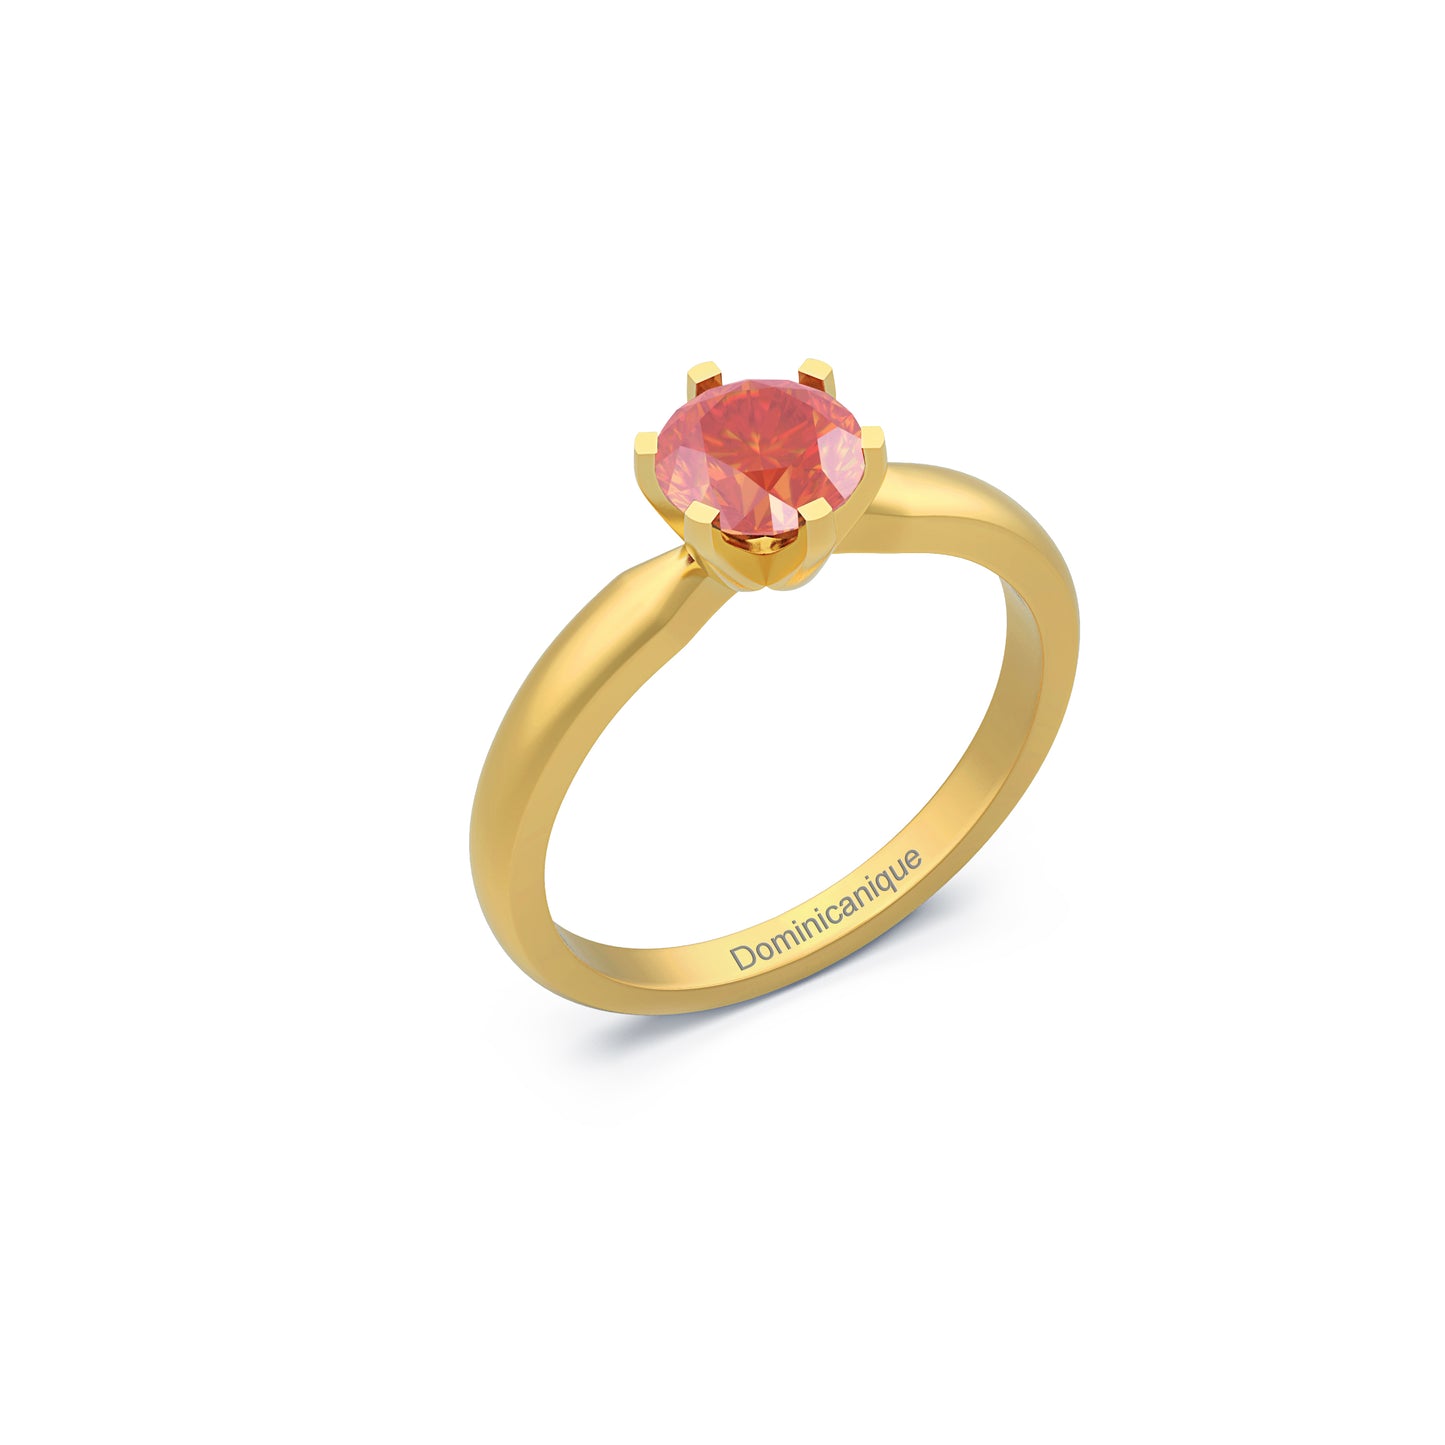 “RF85150" Ring with 0.95ct Dominicanique